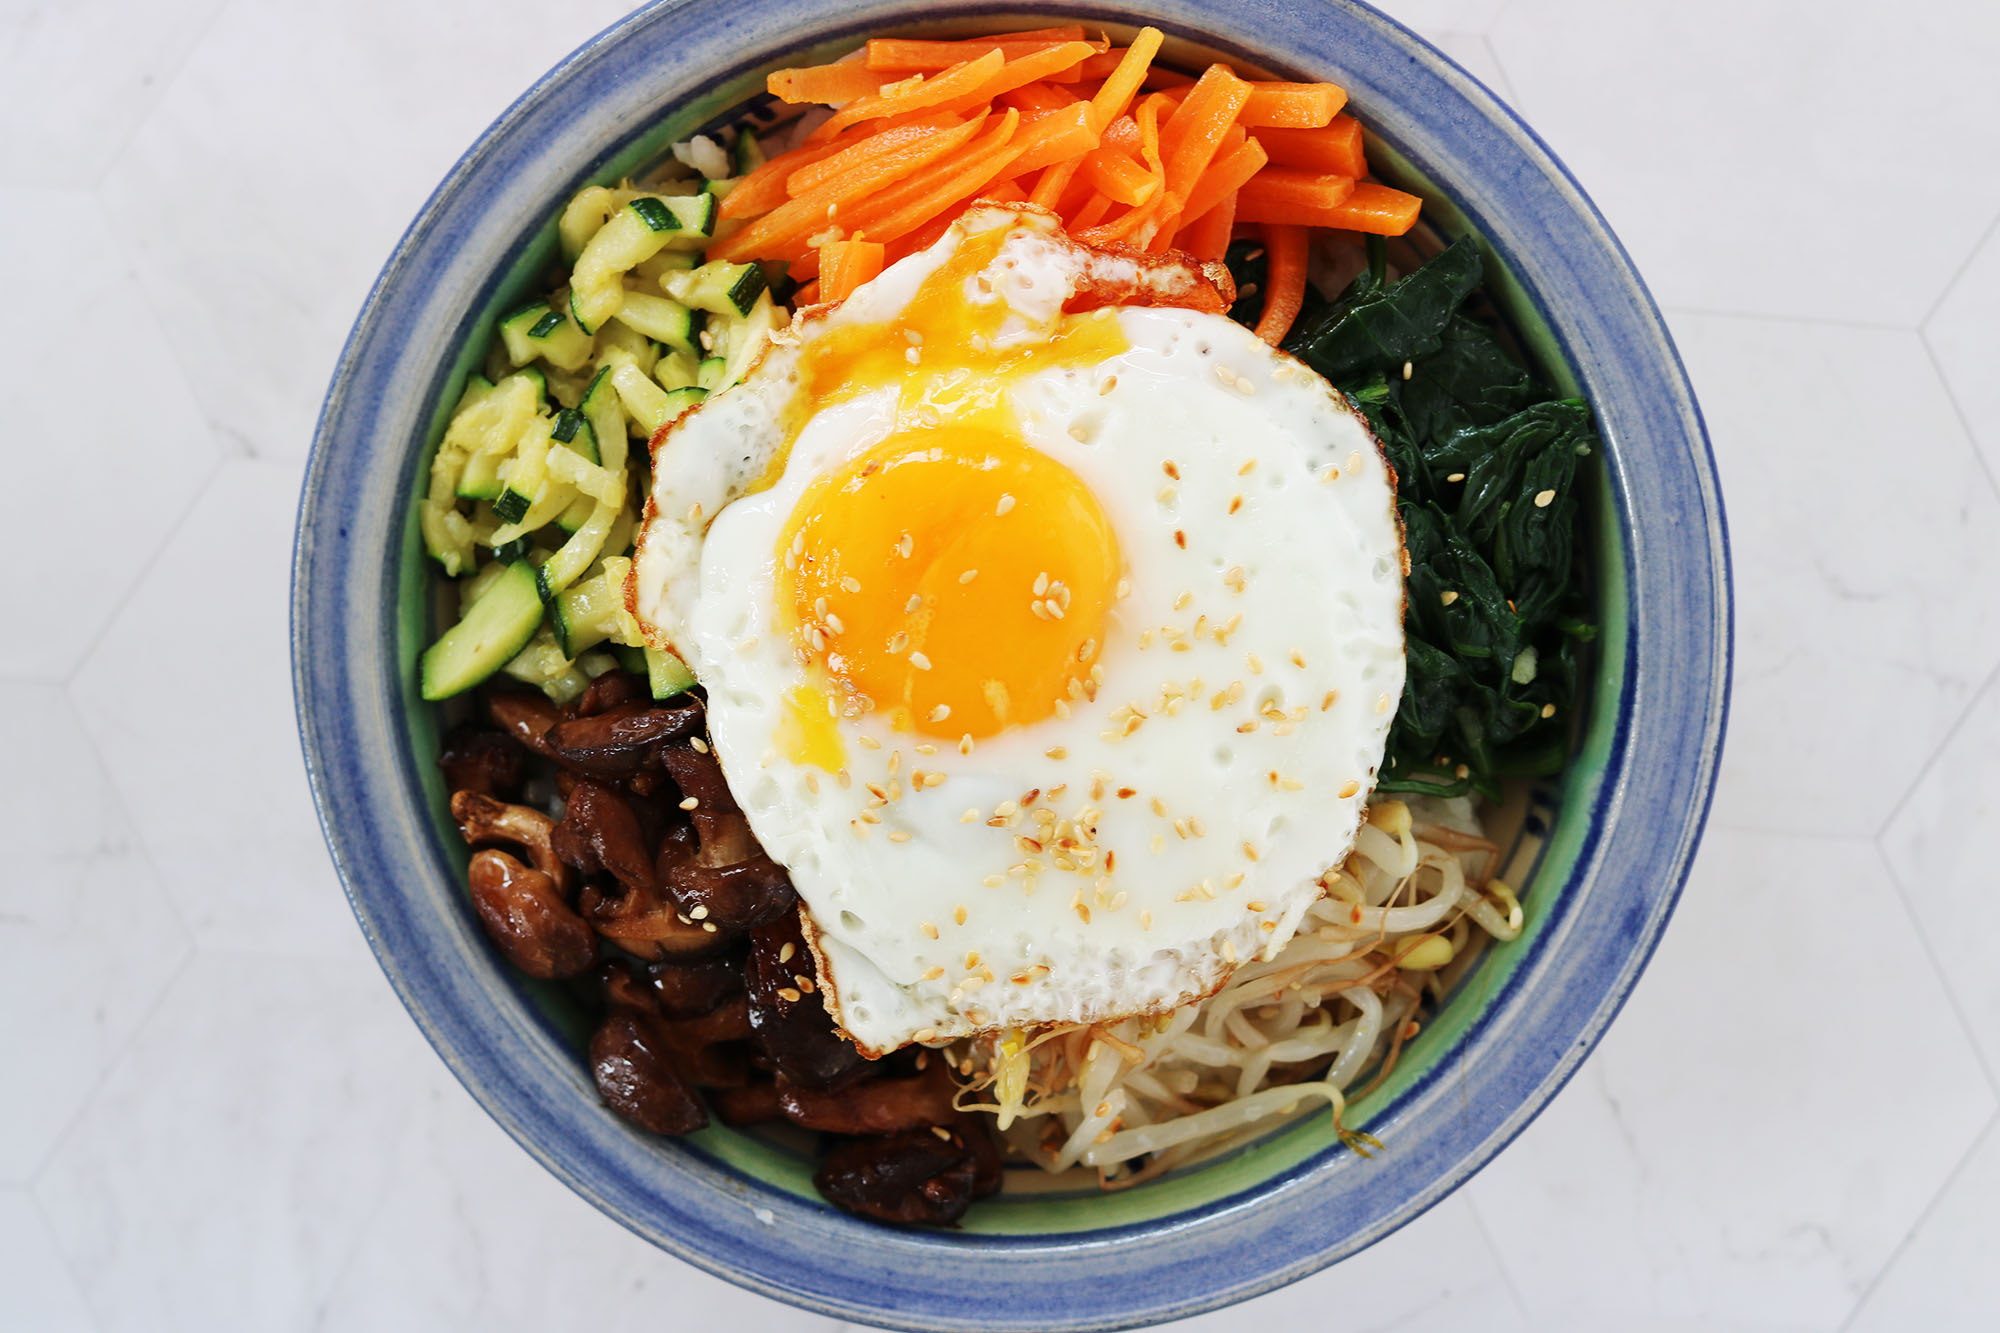 Recipe: Bibimbap with vegetables, mushrooms and fried egg